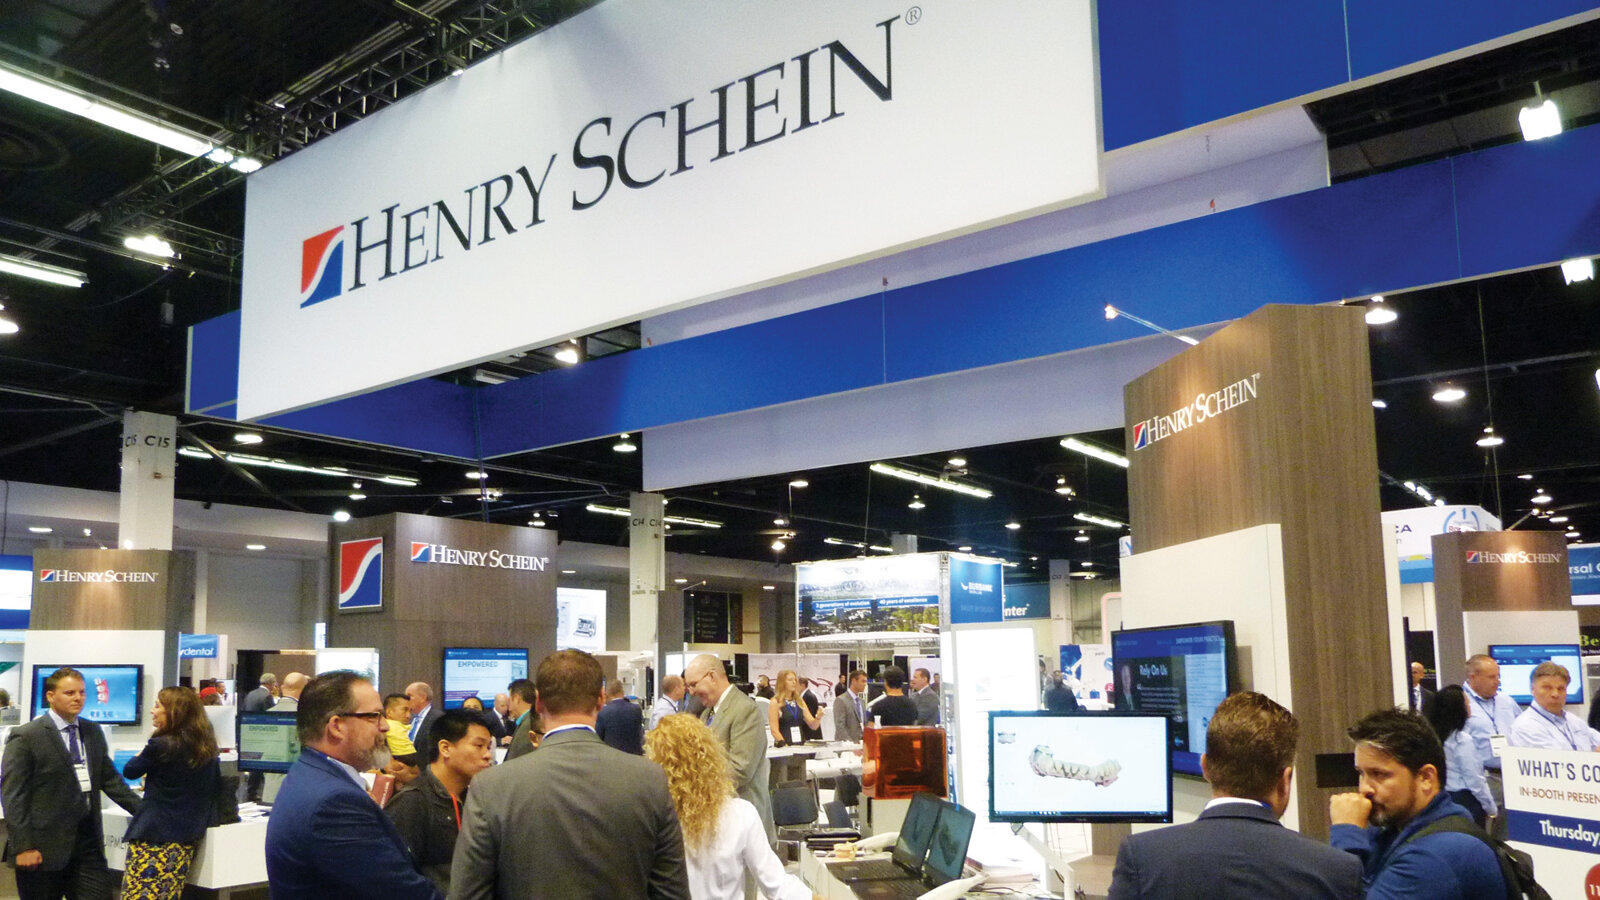 Henry Schein showcases new solutions at ADA meeting